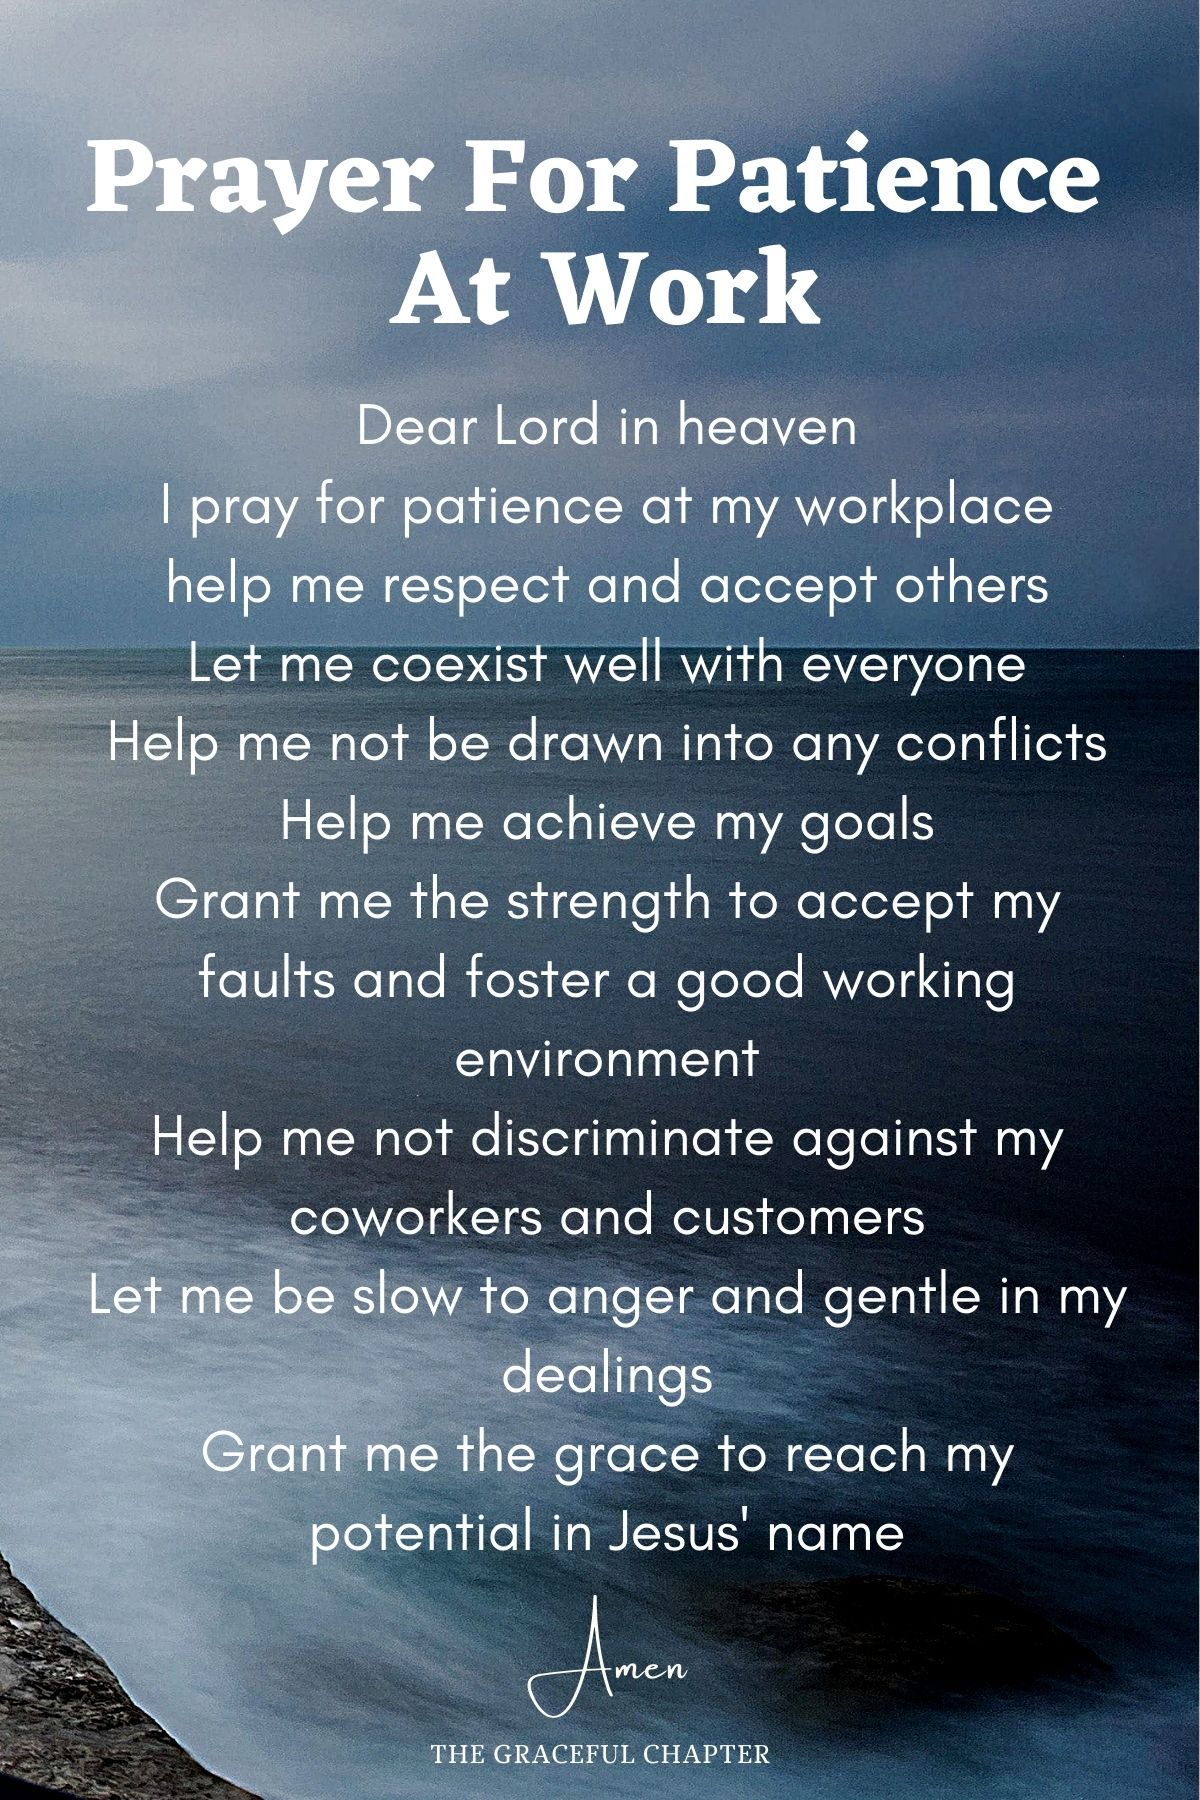 Prayer for patience at work